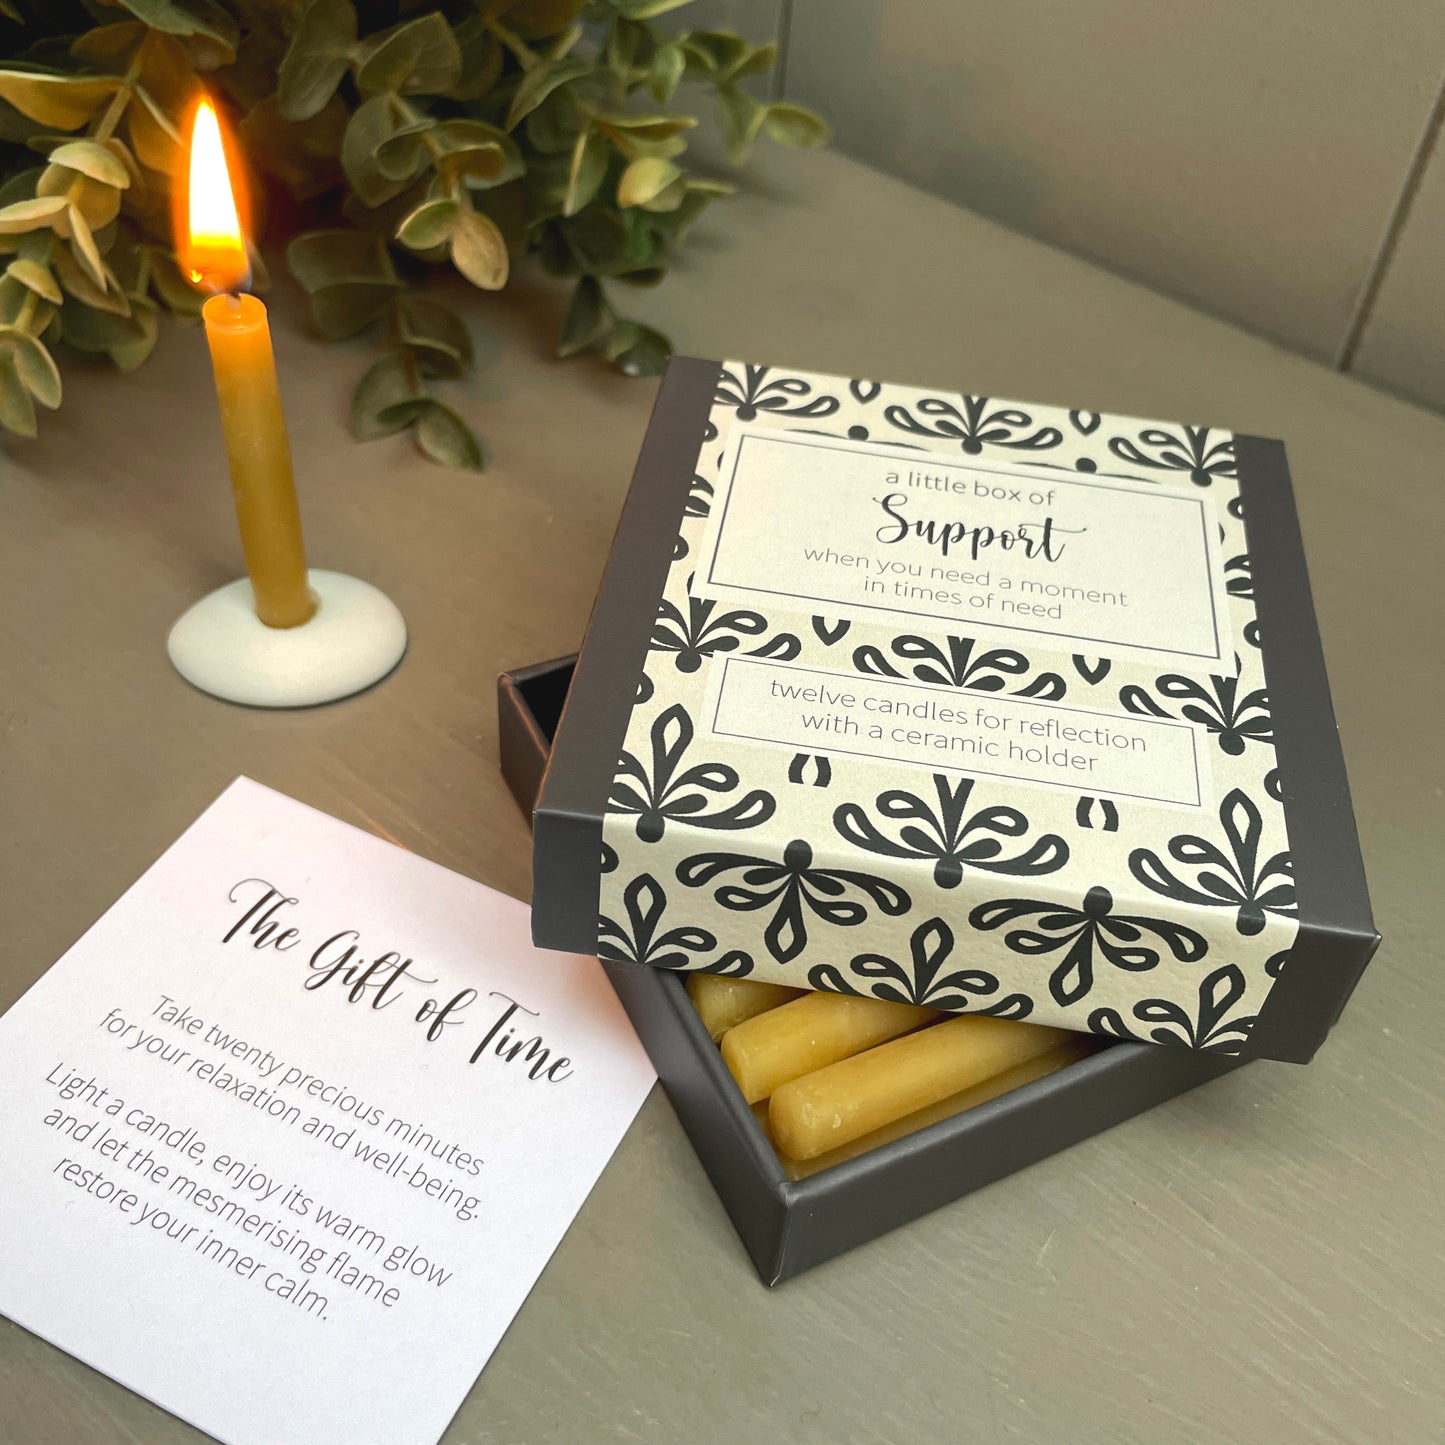 Cotton & Grey A Little Box Of Support Candles Forever Flame Candle Gift Idea